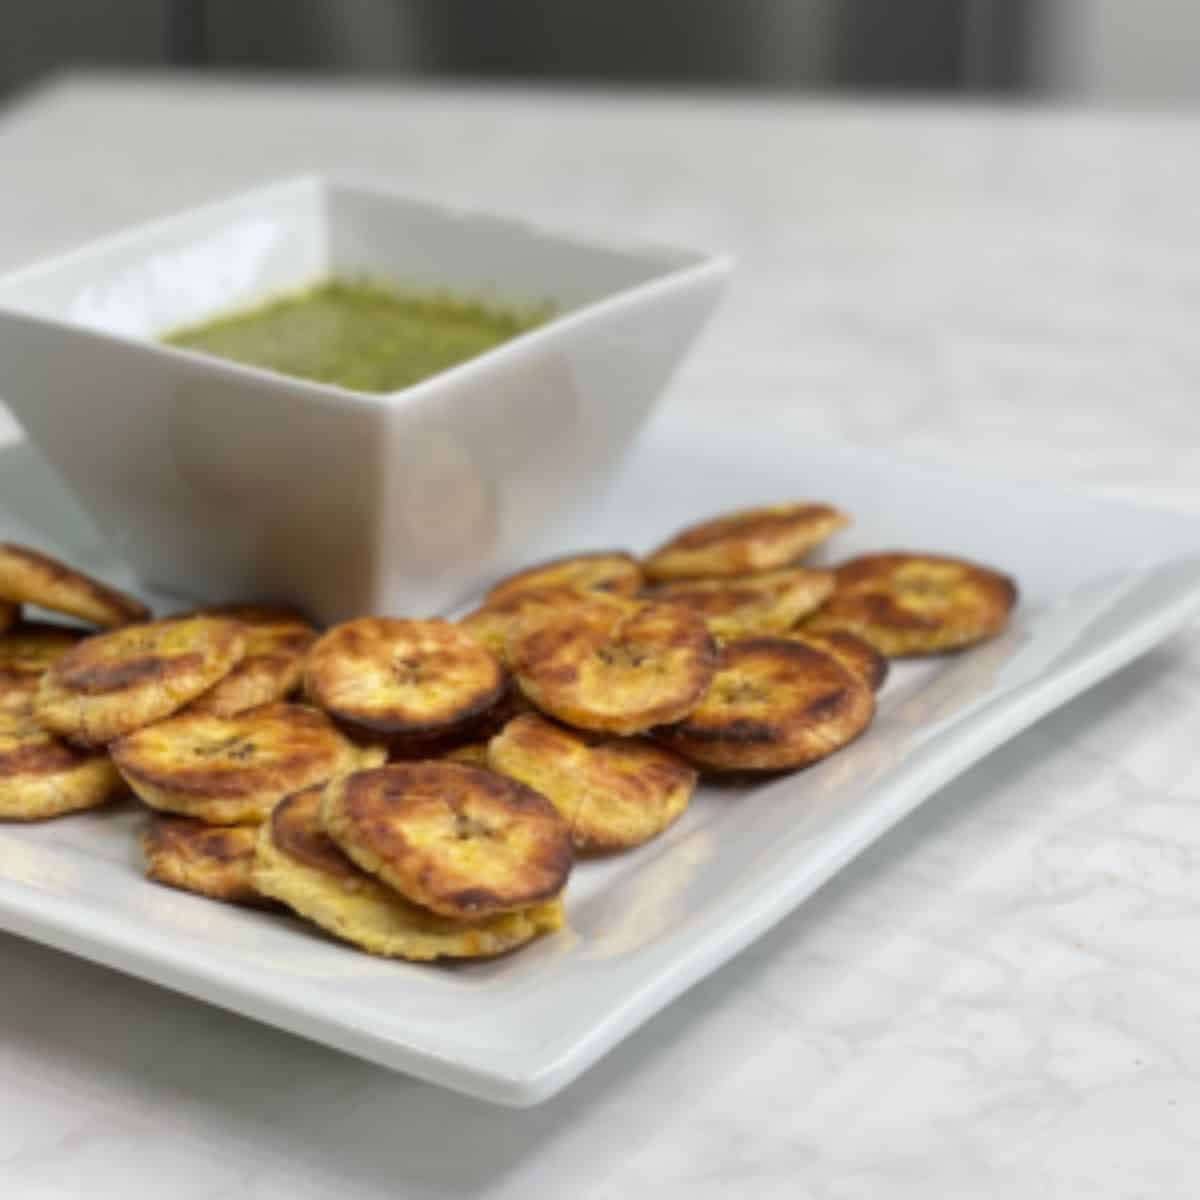 Baked plantains with mojo verde sauce on a white plate. platano maduro